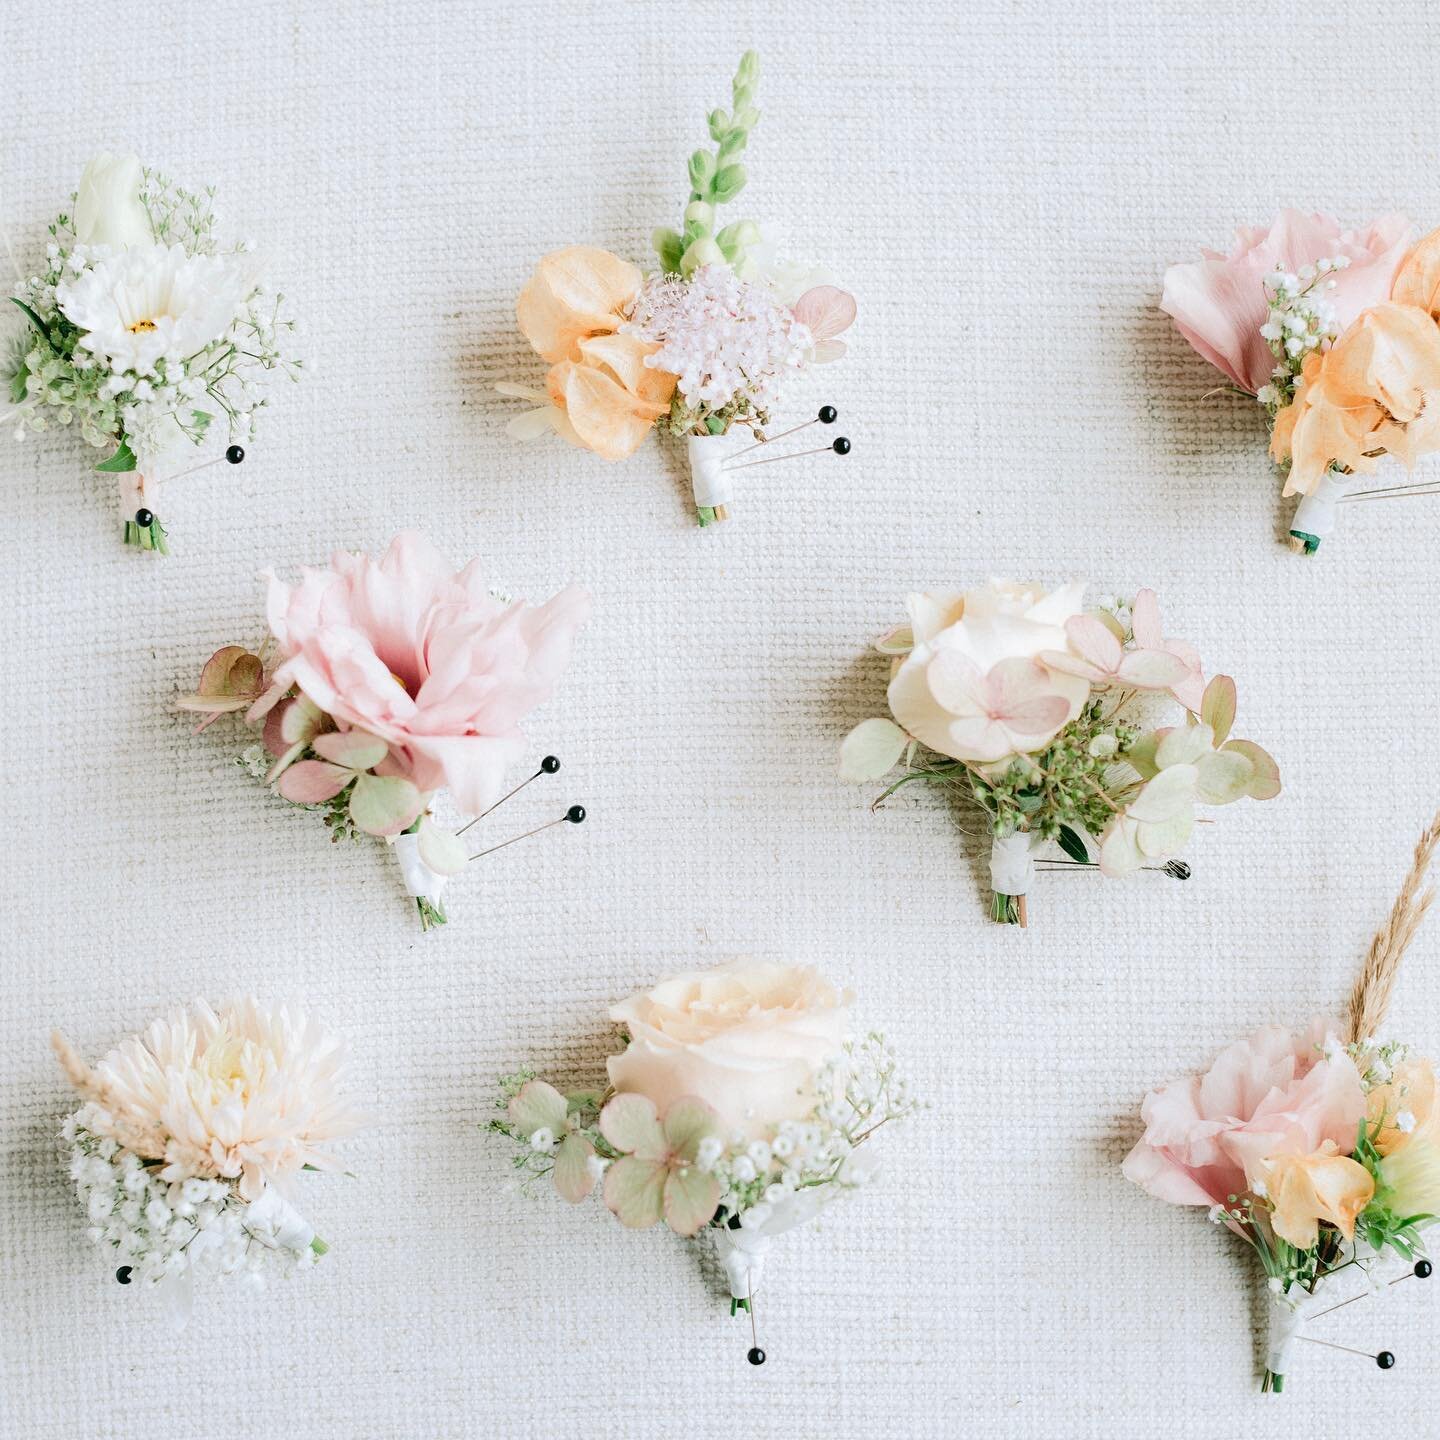 Boutonni&egrave;res by @lemonandtulips 
Shot for: @katiearnoldphotography